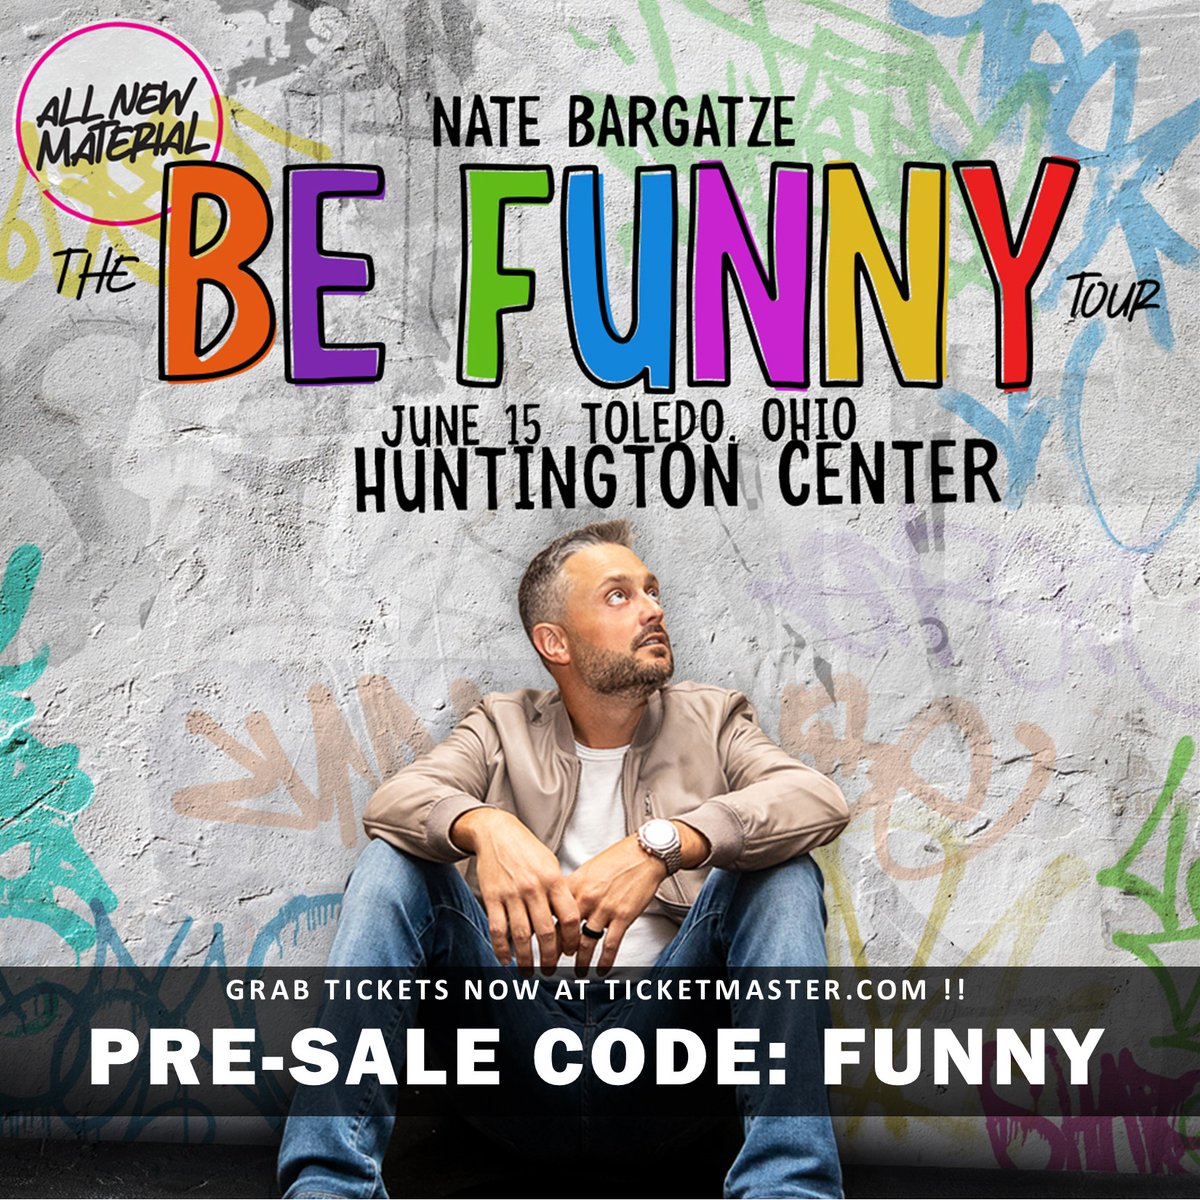 🛒PRE-SALE GOING ON NOW!🛒 Nate Bargatze | The Be Funny Tour Use code FUNNY at bit.ly/3u6wCAa 🟢More Details at HuntingtonCenterToledo.com